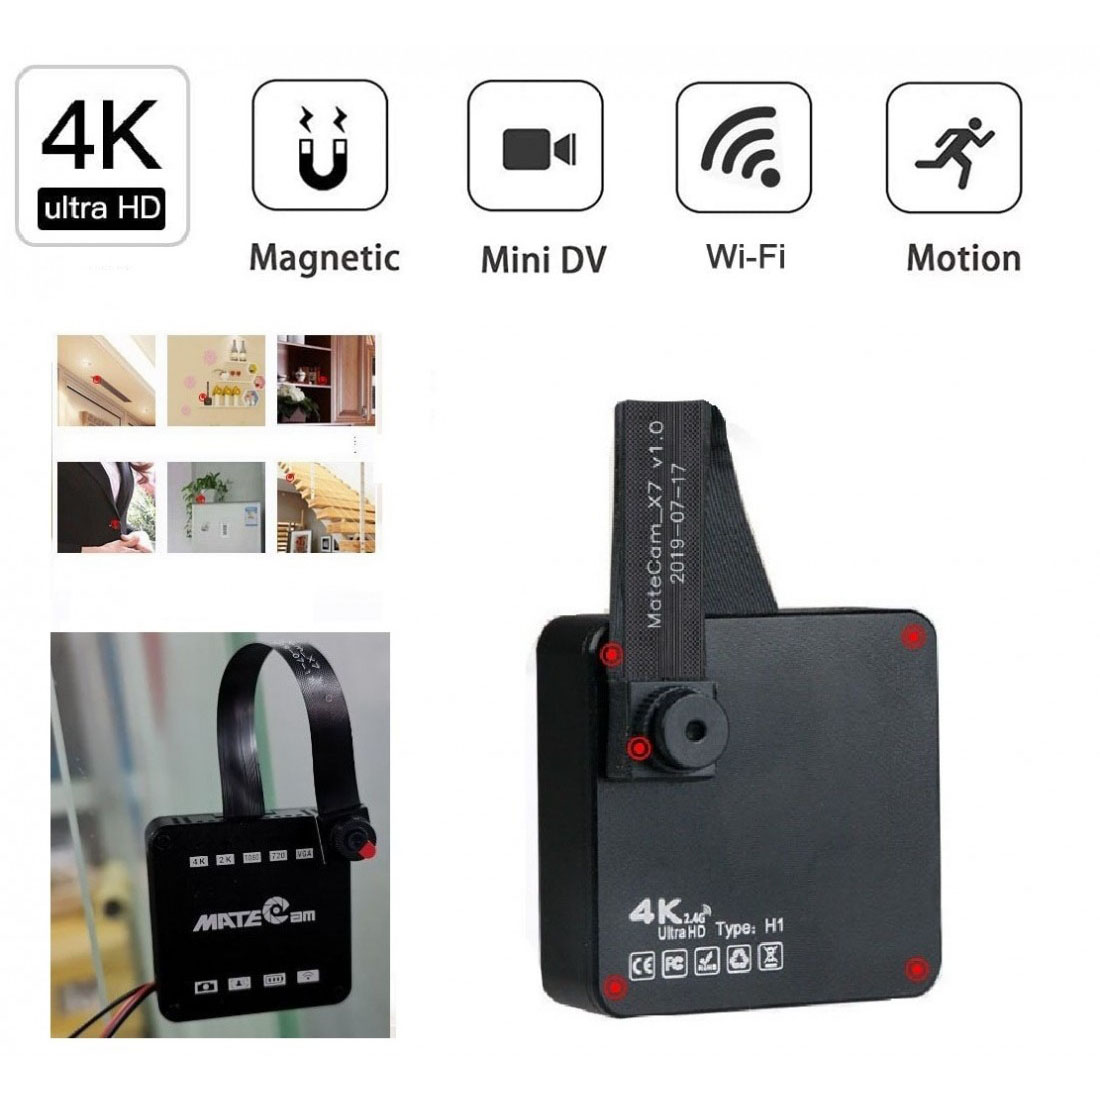 OEM/ODM ChinaSECRET VIDEO RECORDER- 4K Unltra HD Spy Camera Wireless Hidden Camera with Magnet, Mini Portable Home Security Battery Powered Covert Nanny Cam, Small Video Recorder /Motion Activated – MATECAM